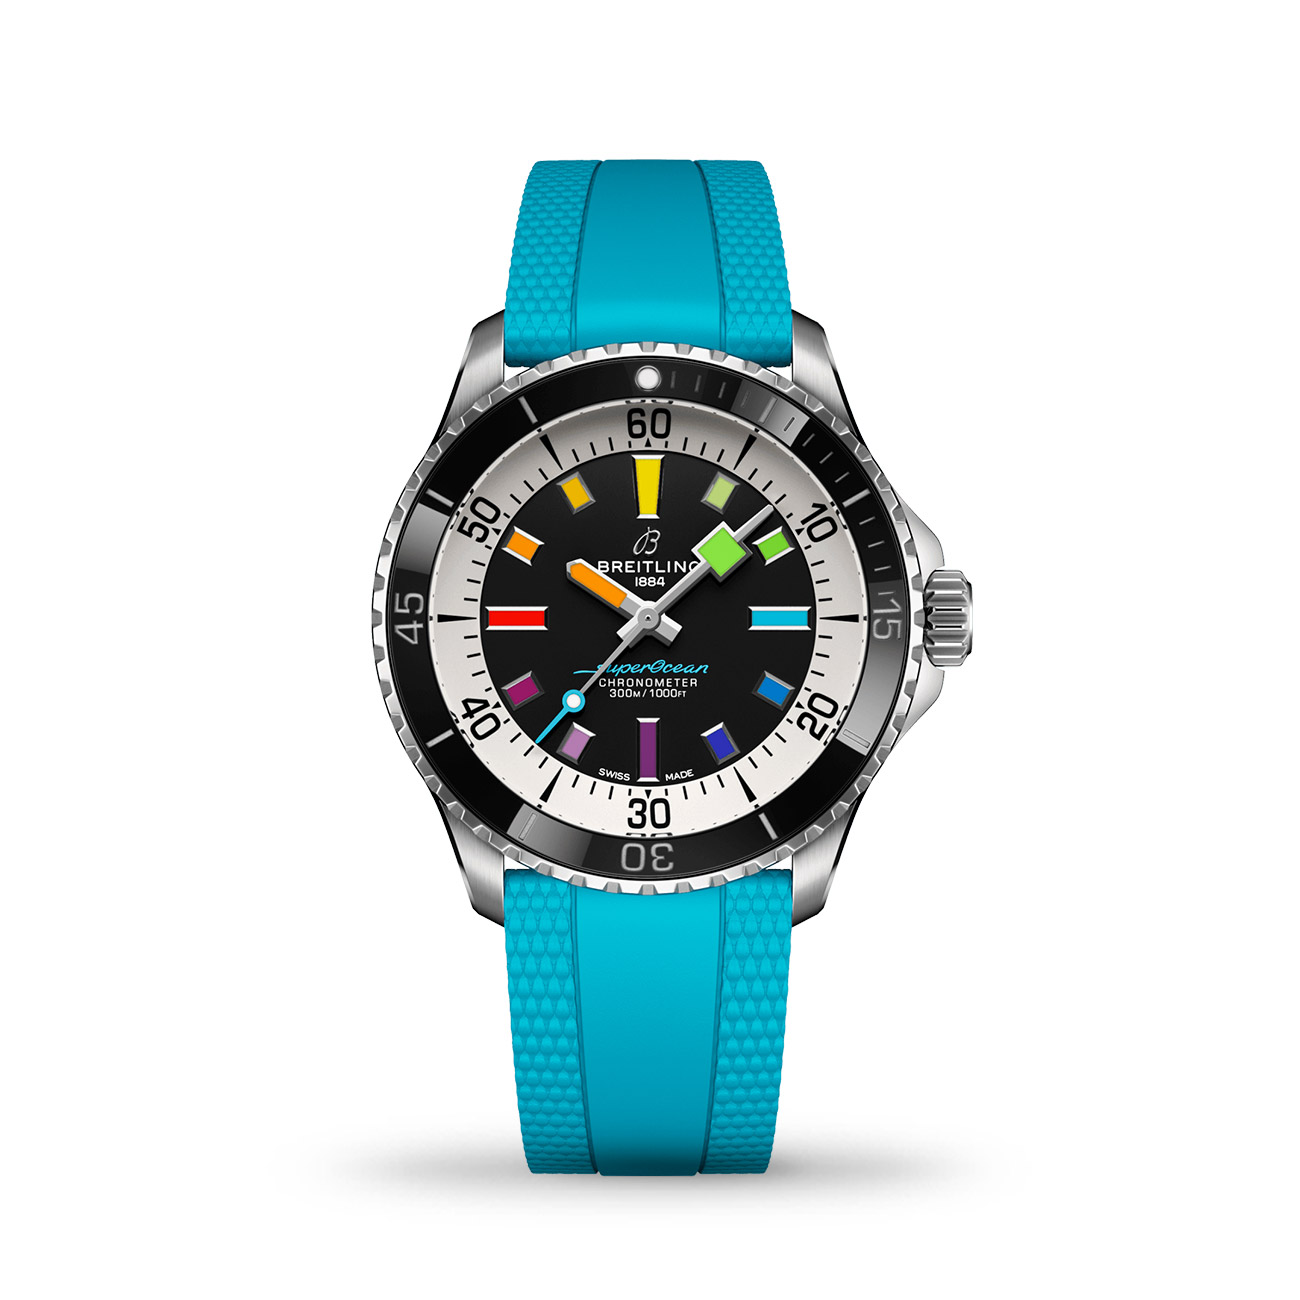 Breitling Superocean Automatic 42mm